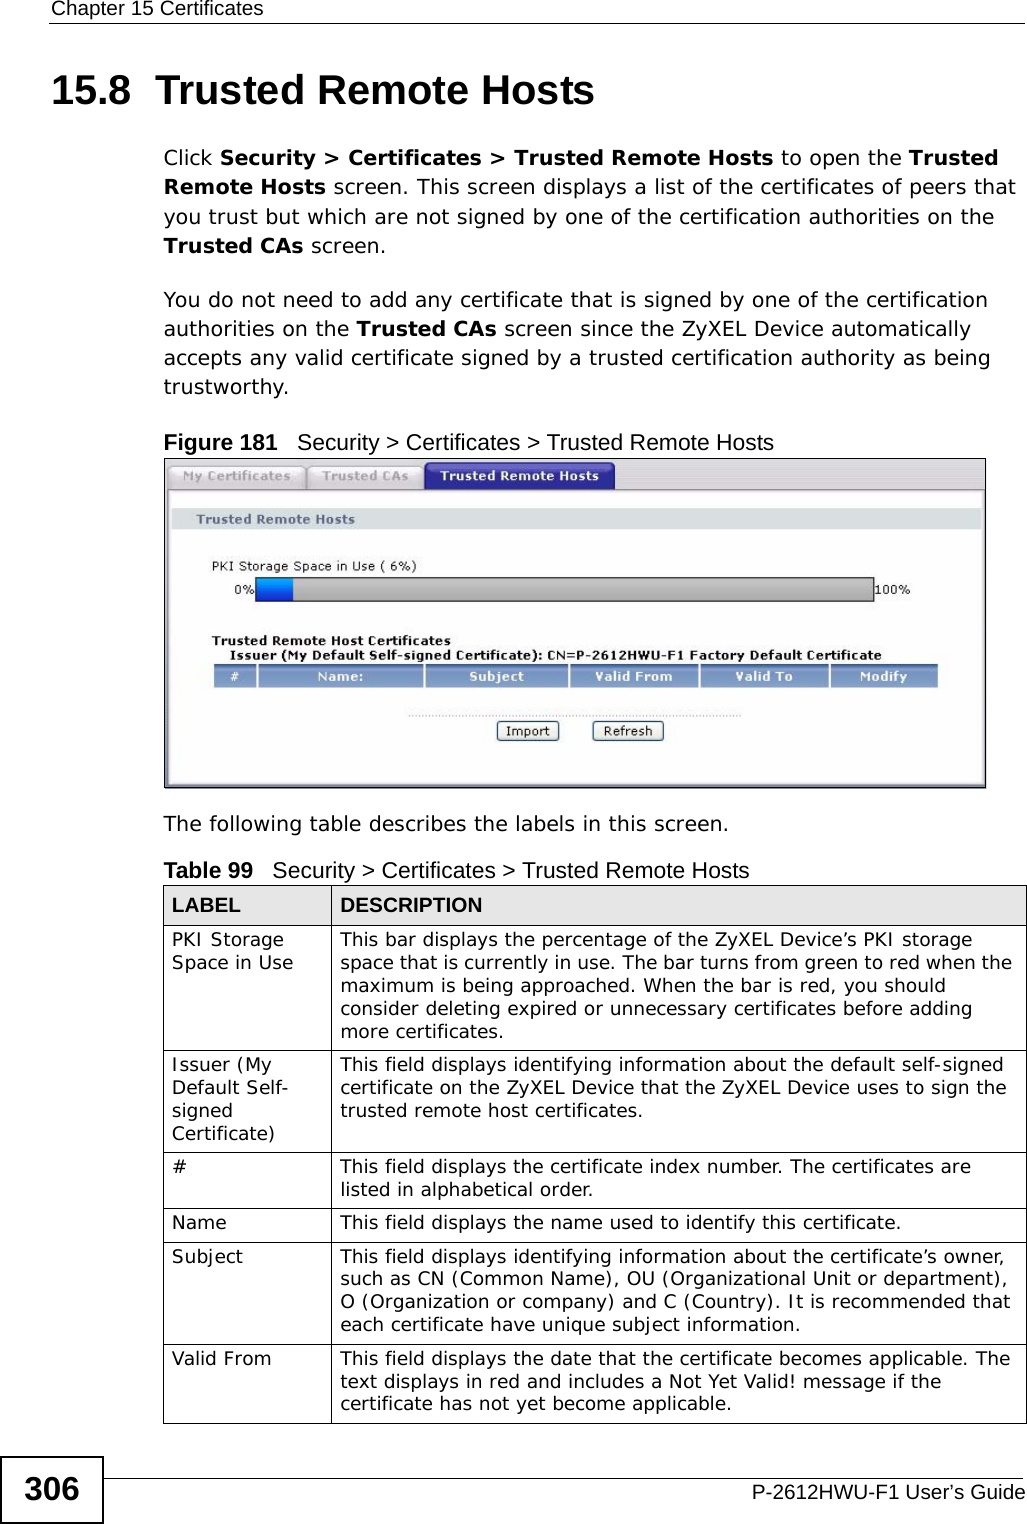 Chapter 15 CertificatesP-2612HWU-F1 User’s Guide30615.8  Trusted Remote Hosts   Click Security &gt; Certificates &gt; Trusted Remote Hosts to open the Trusted Remote Hosts screen. This screen displays a list of the certificates of peers that you trust but which are not signed by one of the certification authorities on the Trusted CAs screen.You do not need to add any certificate that is signed by one of the certification authorities on the Trusted CAs screen since the ZyXEL Device automatically accepts any valid certificate signed by a trusted certification authority as being trustworthy.Figure 181   Security &gt; Certificates &gt; Trusted Remote HostsThe following table describes the labels in this screen. Table 99   Security &gt; Certificates &gt; Trusted Remote HostsLABEL DESCRIPTIONPKI Storage Space in Use This bar displays the percentage of the ZyXEL Device’s PKI storage space that is currently in use. The bar turns from green to red when the maximum is being approached. When the bar is red, you should consider deleting expired or unnecessary certificates before adding more certificates.Issuer (My Default Self-signed Certificate)This field displays identifying information about the default self-signed certificate on the ZyXEL Device that the ZyXEL Device uses to sign the trusted remote host certificates.# This field displays the certificate index number. The certificates are listed in alphabetical order. Name This field displays the name used to identify this certificate. Subject This field displays identifying information about the certificate’s owner, such as CN (Common Name), OU (Organizational Unit or department), O (Organization or company) and C (Country). It is recommended that each certificate have unique subject information.Valid From This field displays the date that the certificate becomes applicable. The text displays in red and includes a Not Yet Valid! message if the certificate has not yet become applicable.